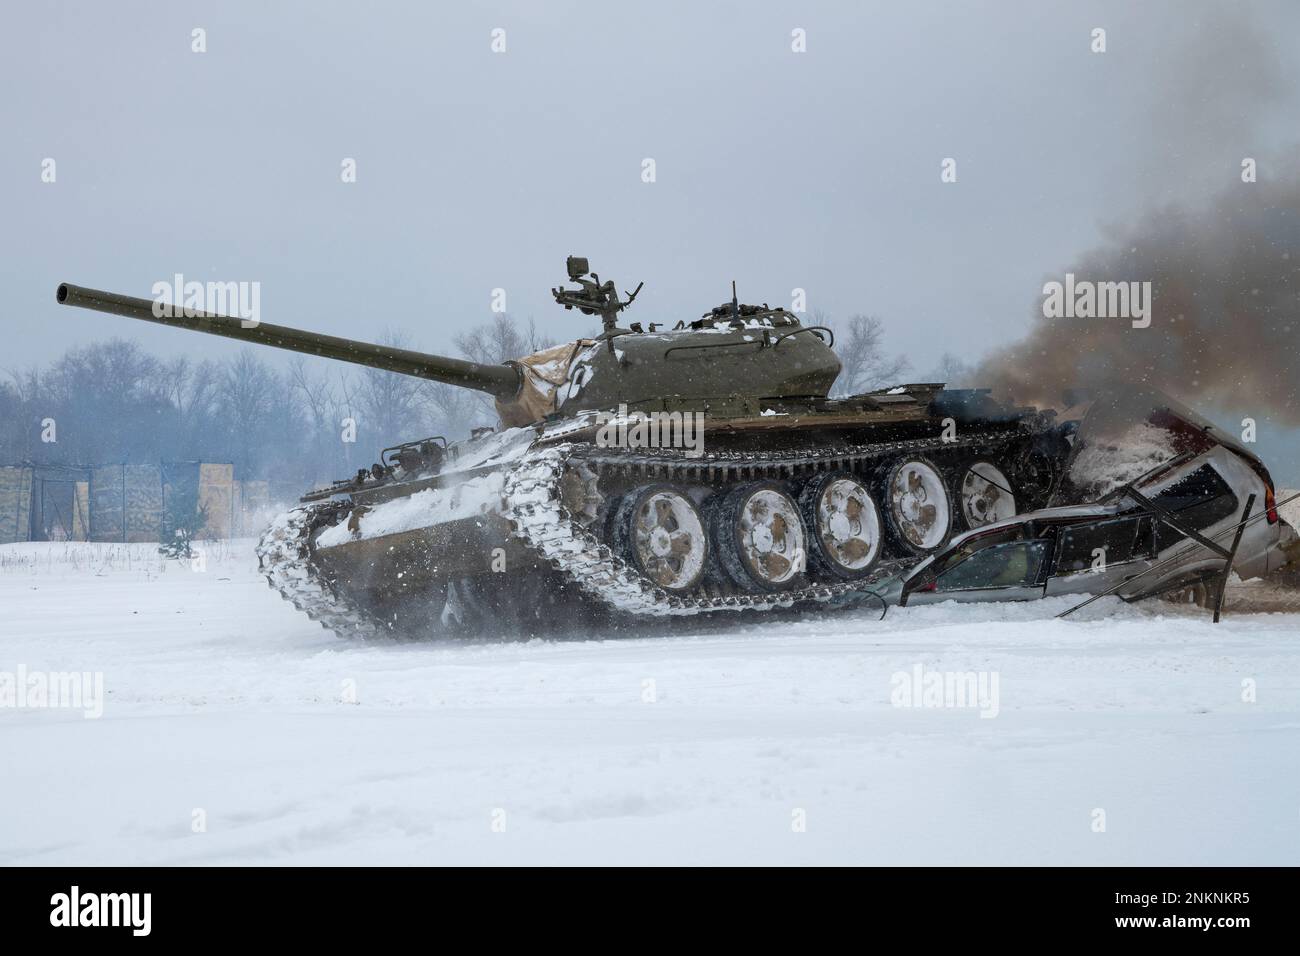 KRASNOYE SELO, RUSSIA - FEBRUARY 19, 2023: A Soviet tank T-54 crushed a passenger car. Fragment of a tank show in the military historical park 'Steel Stock Photo